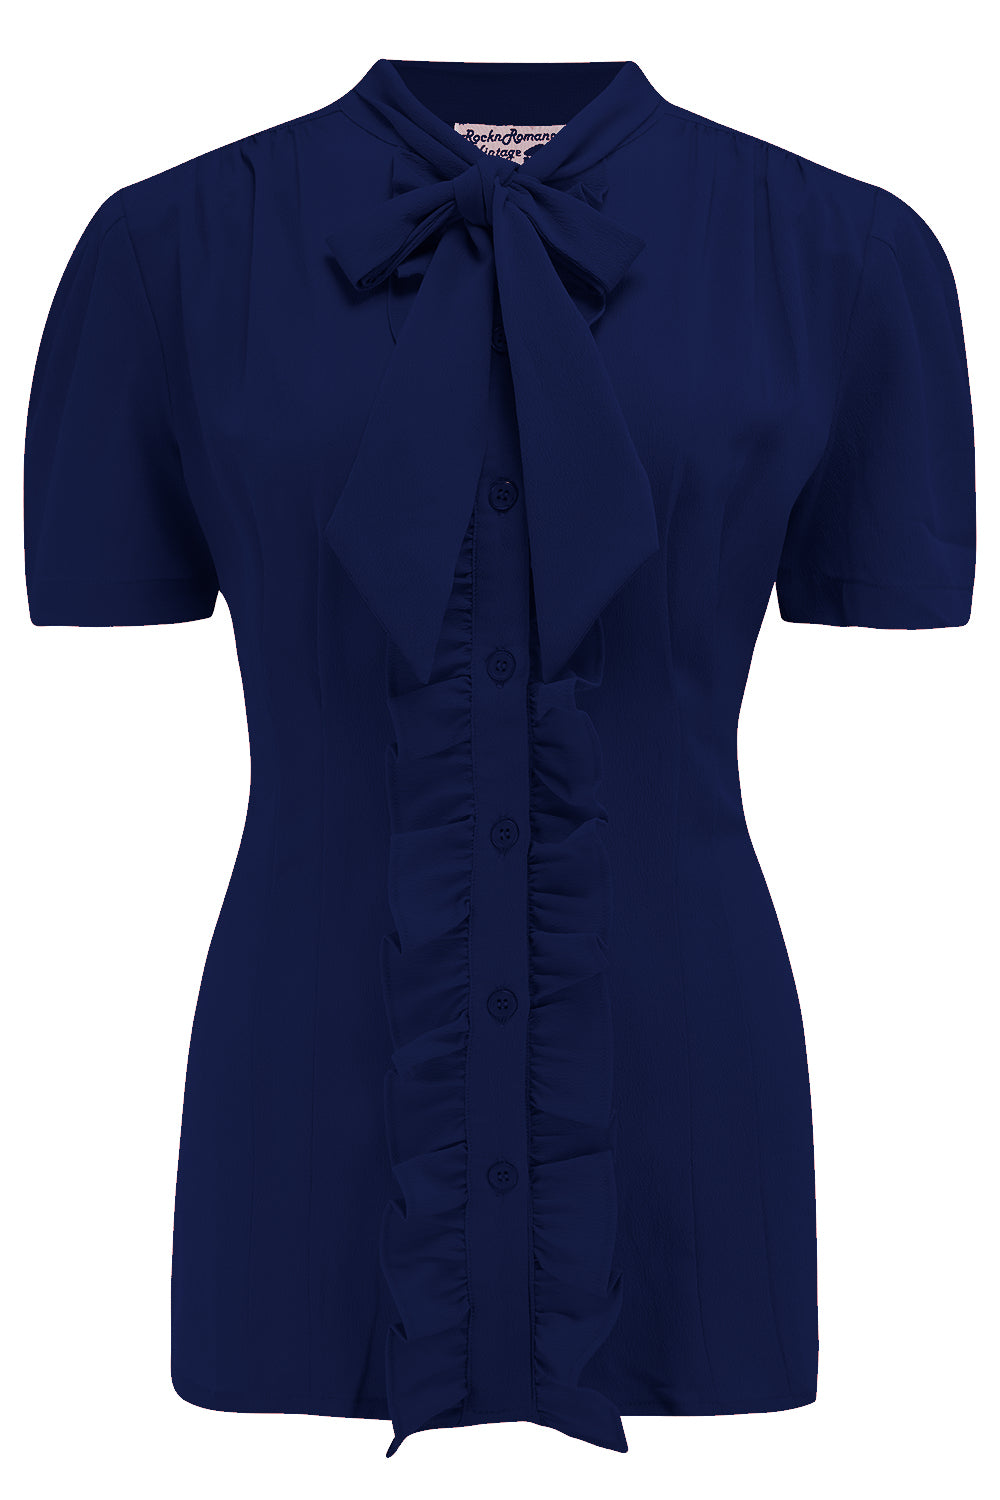 The "Betsy" Ruffle, Pussybow Blouse in Solid Navy, True & Authentic 1950s Vintage Style - CC41, Goodwood Revival, Twinwood Festival, Viva Las Vegas Rockabilly Weekend Rock n Romance Rock n Romance